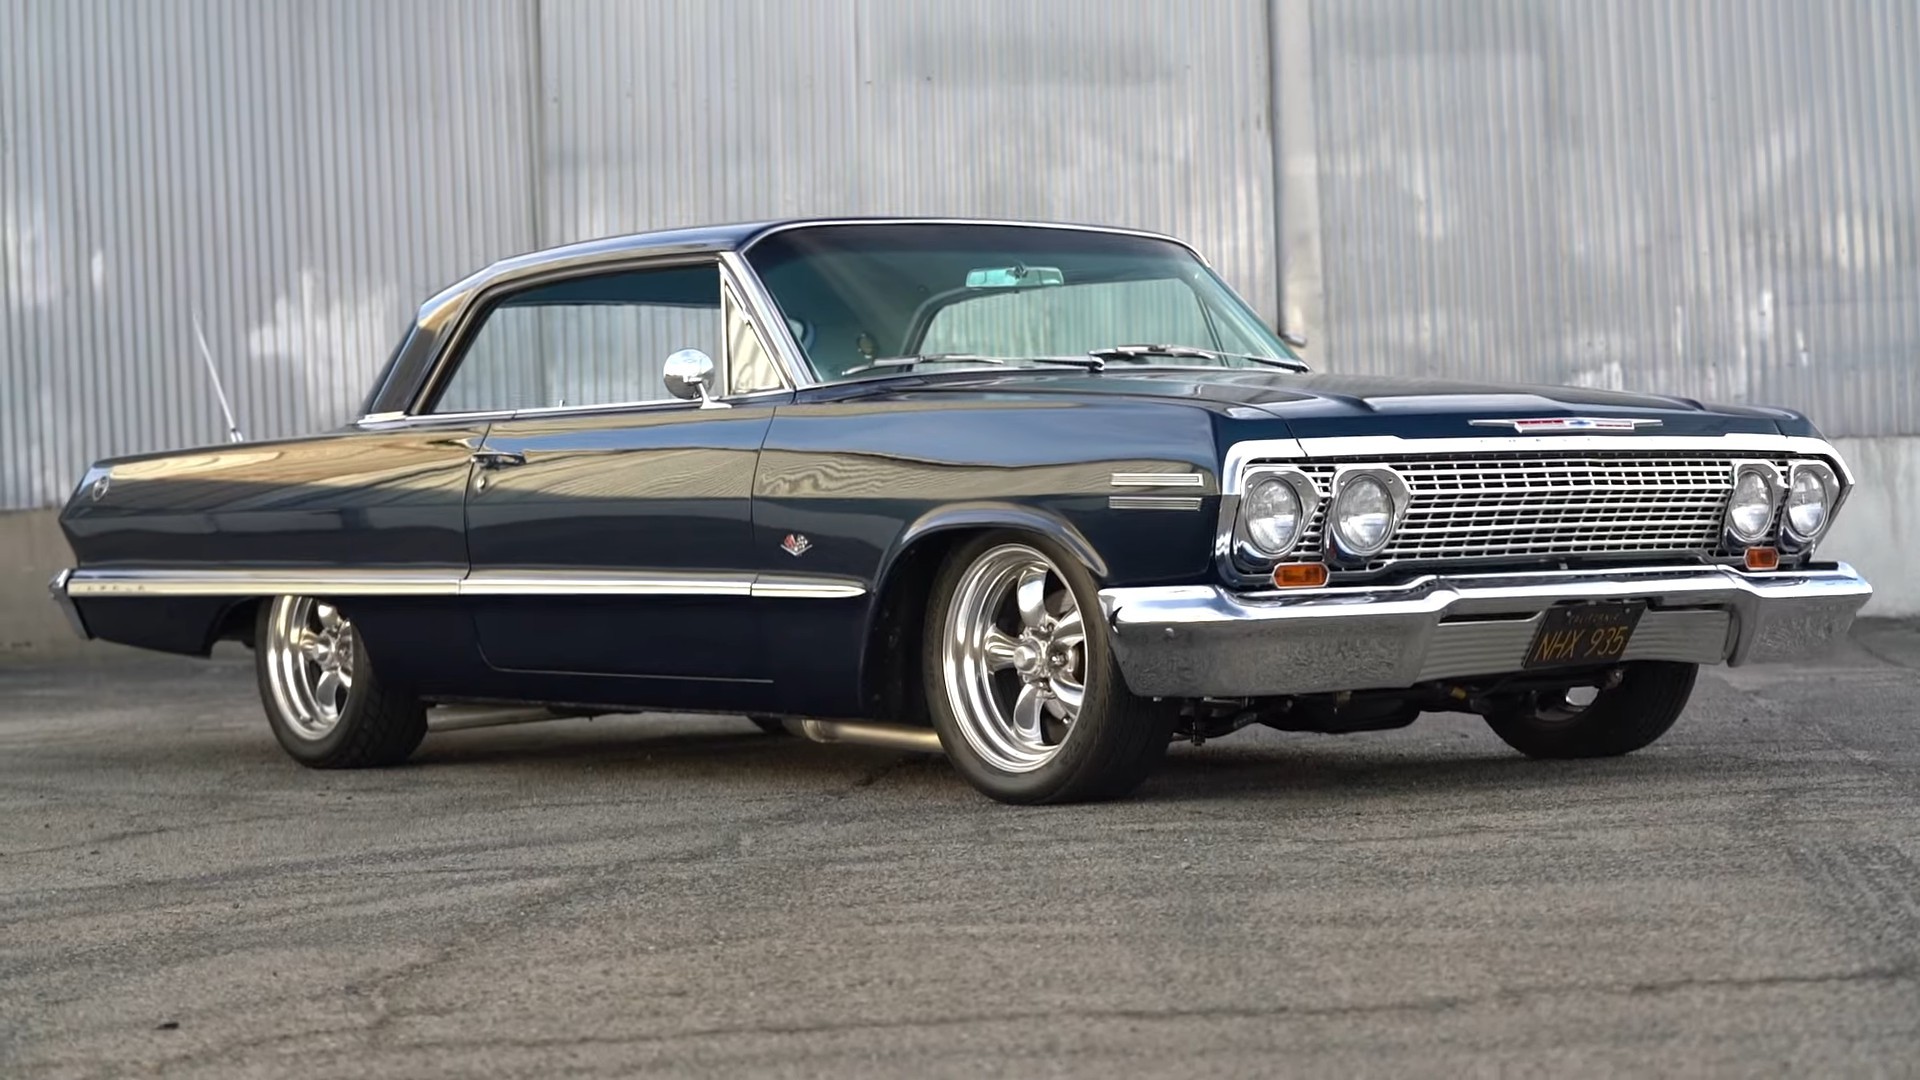 1963 Chevrolet Impala Passion Project Brings Classic Vibes Into the ...